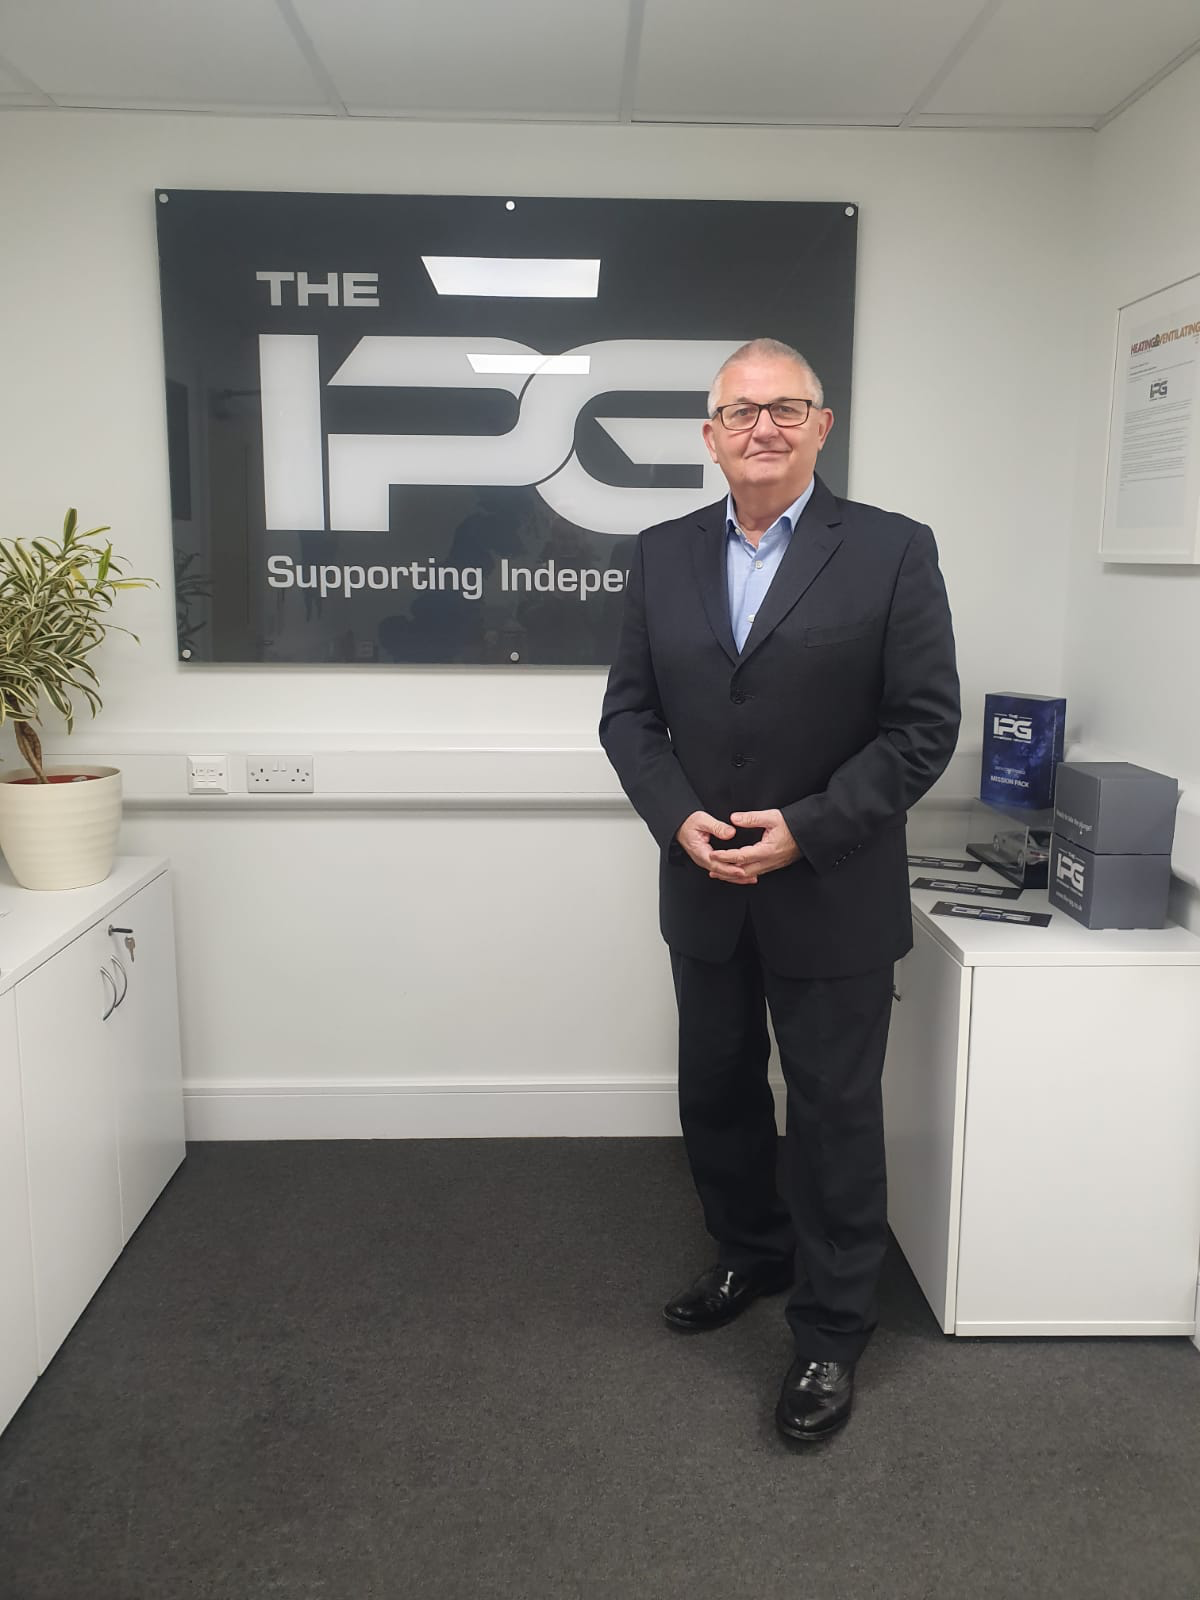 The IPG supporting suppliers with a green mission @ipg_the